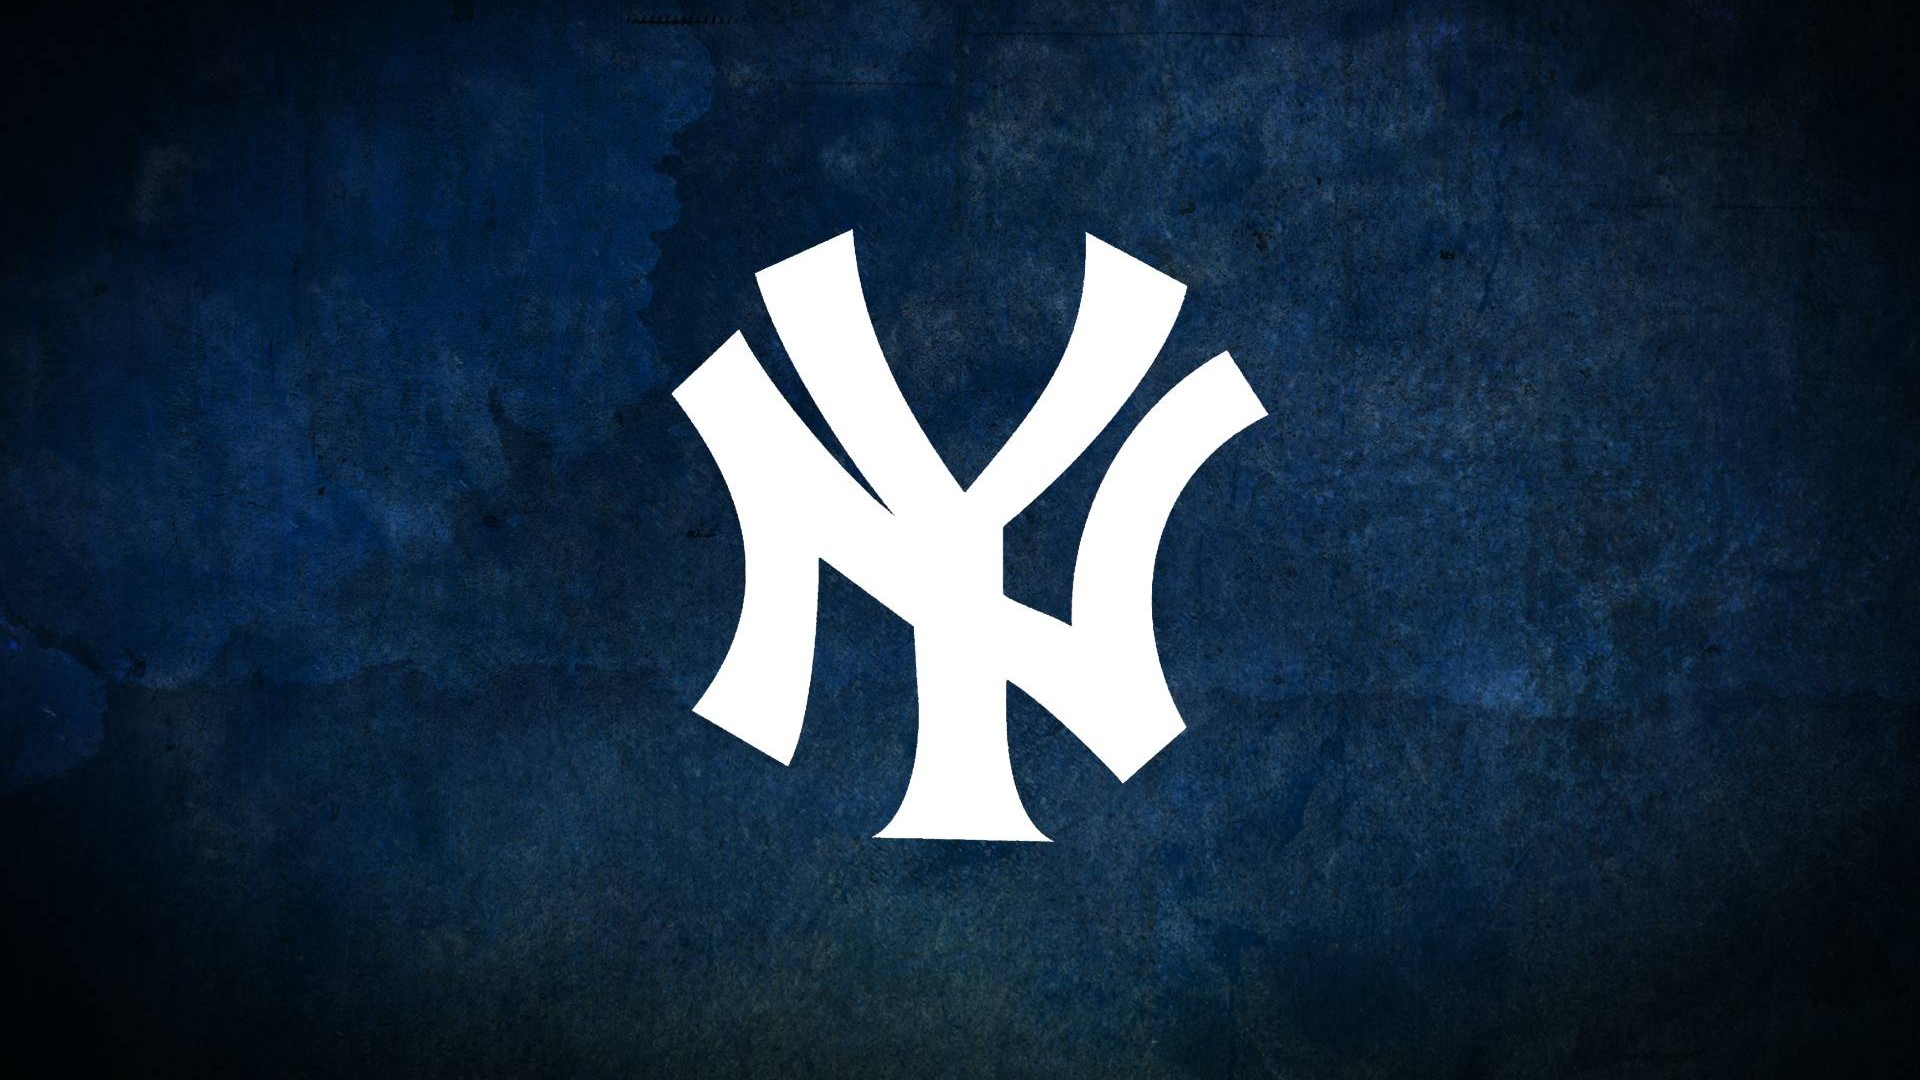 New York Yankees MLB Wallpaper HD with high-resolution 1920x1080 pixel. You can use this wallpaper for Mac Desktop Wallpaper, Laptop Screensavers, Android Wallpapers, Tablet or iPhone Home Screen and another mobile phone device